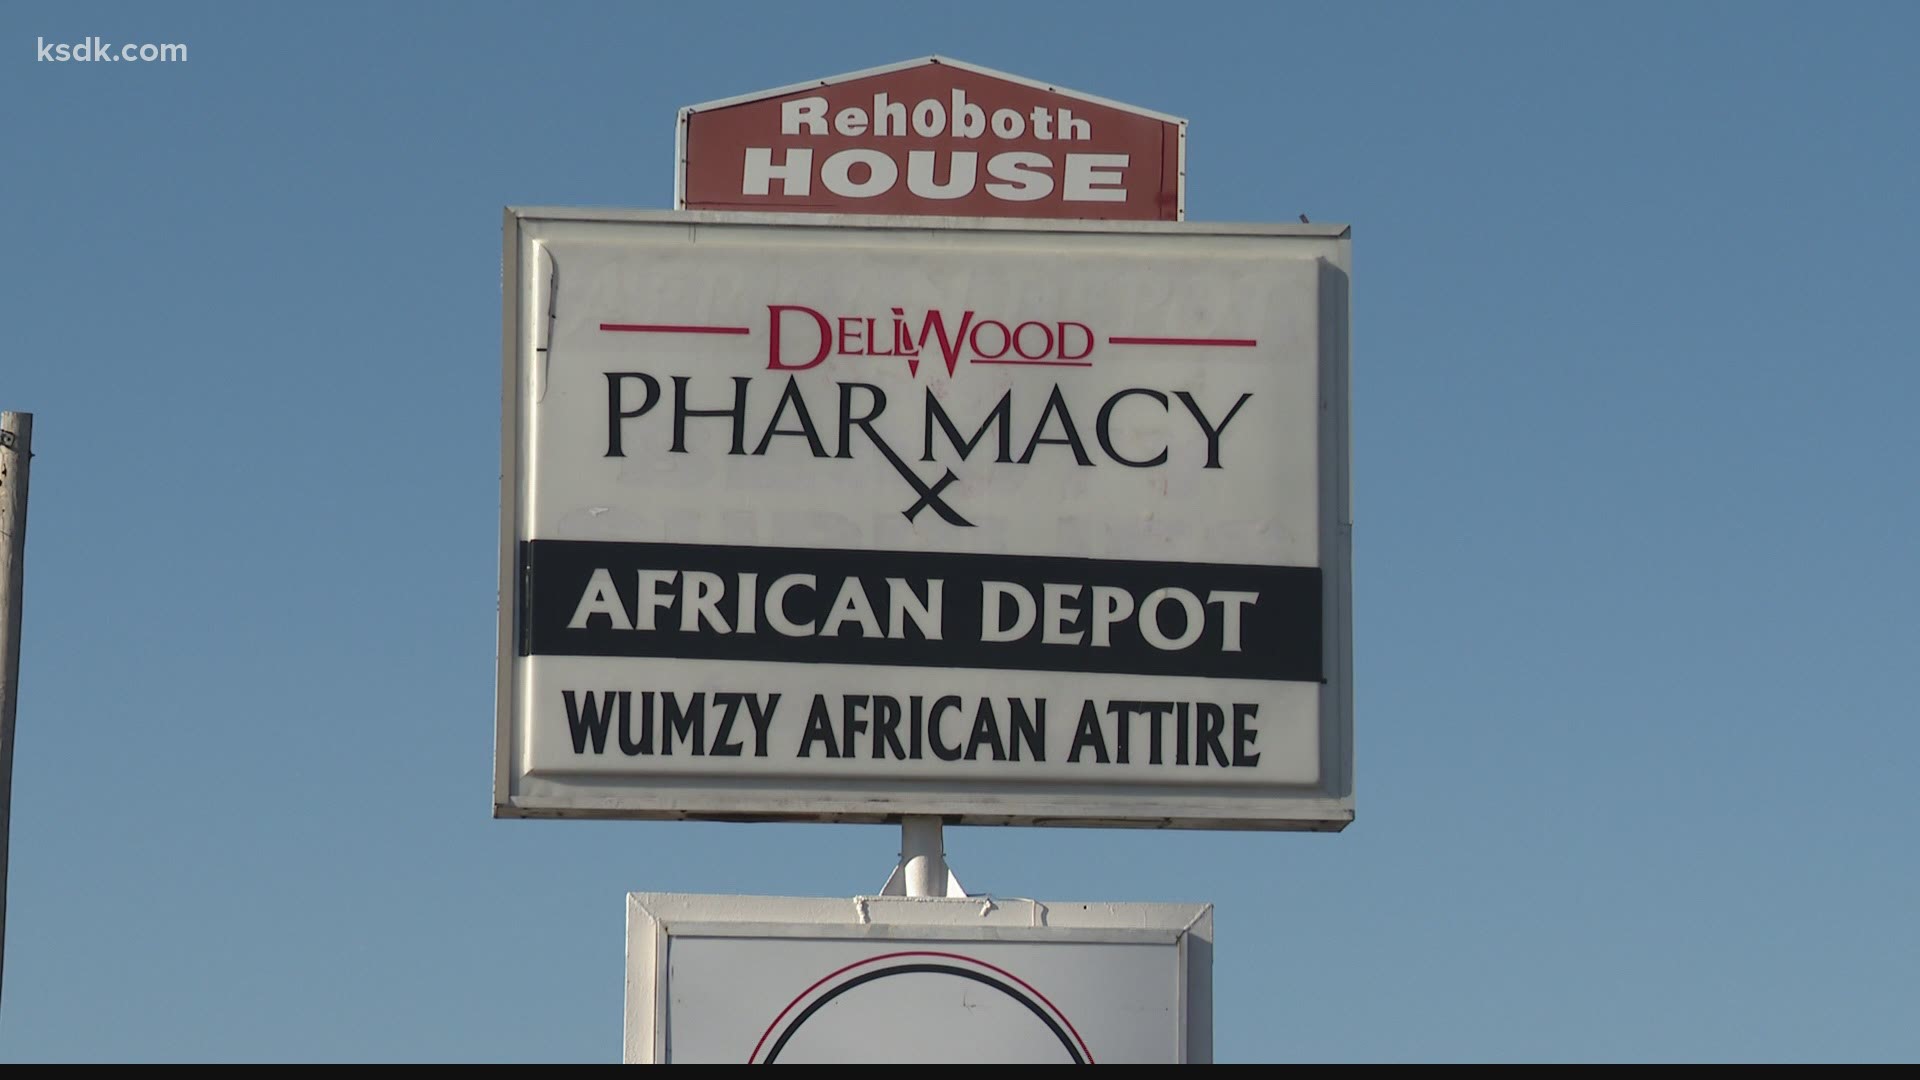 "It went well and we are encouraging as many people as possible to get a shot," said a Dellwood pharmacist